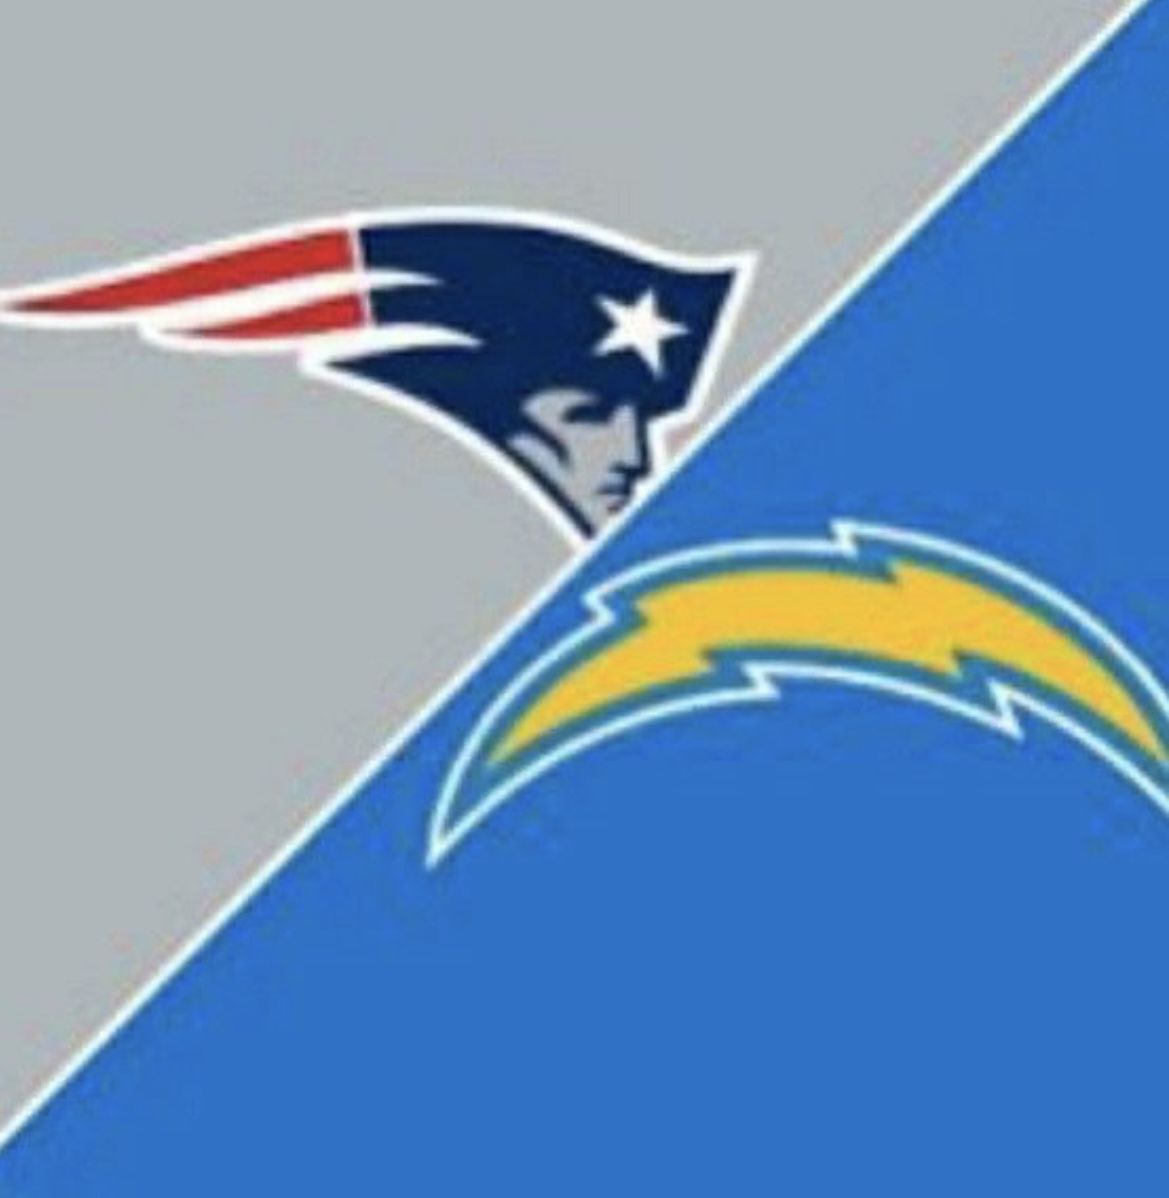 New England Patriots vs Chargers 10/31